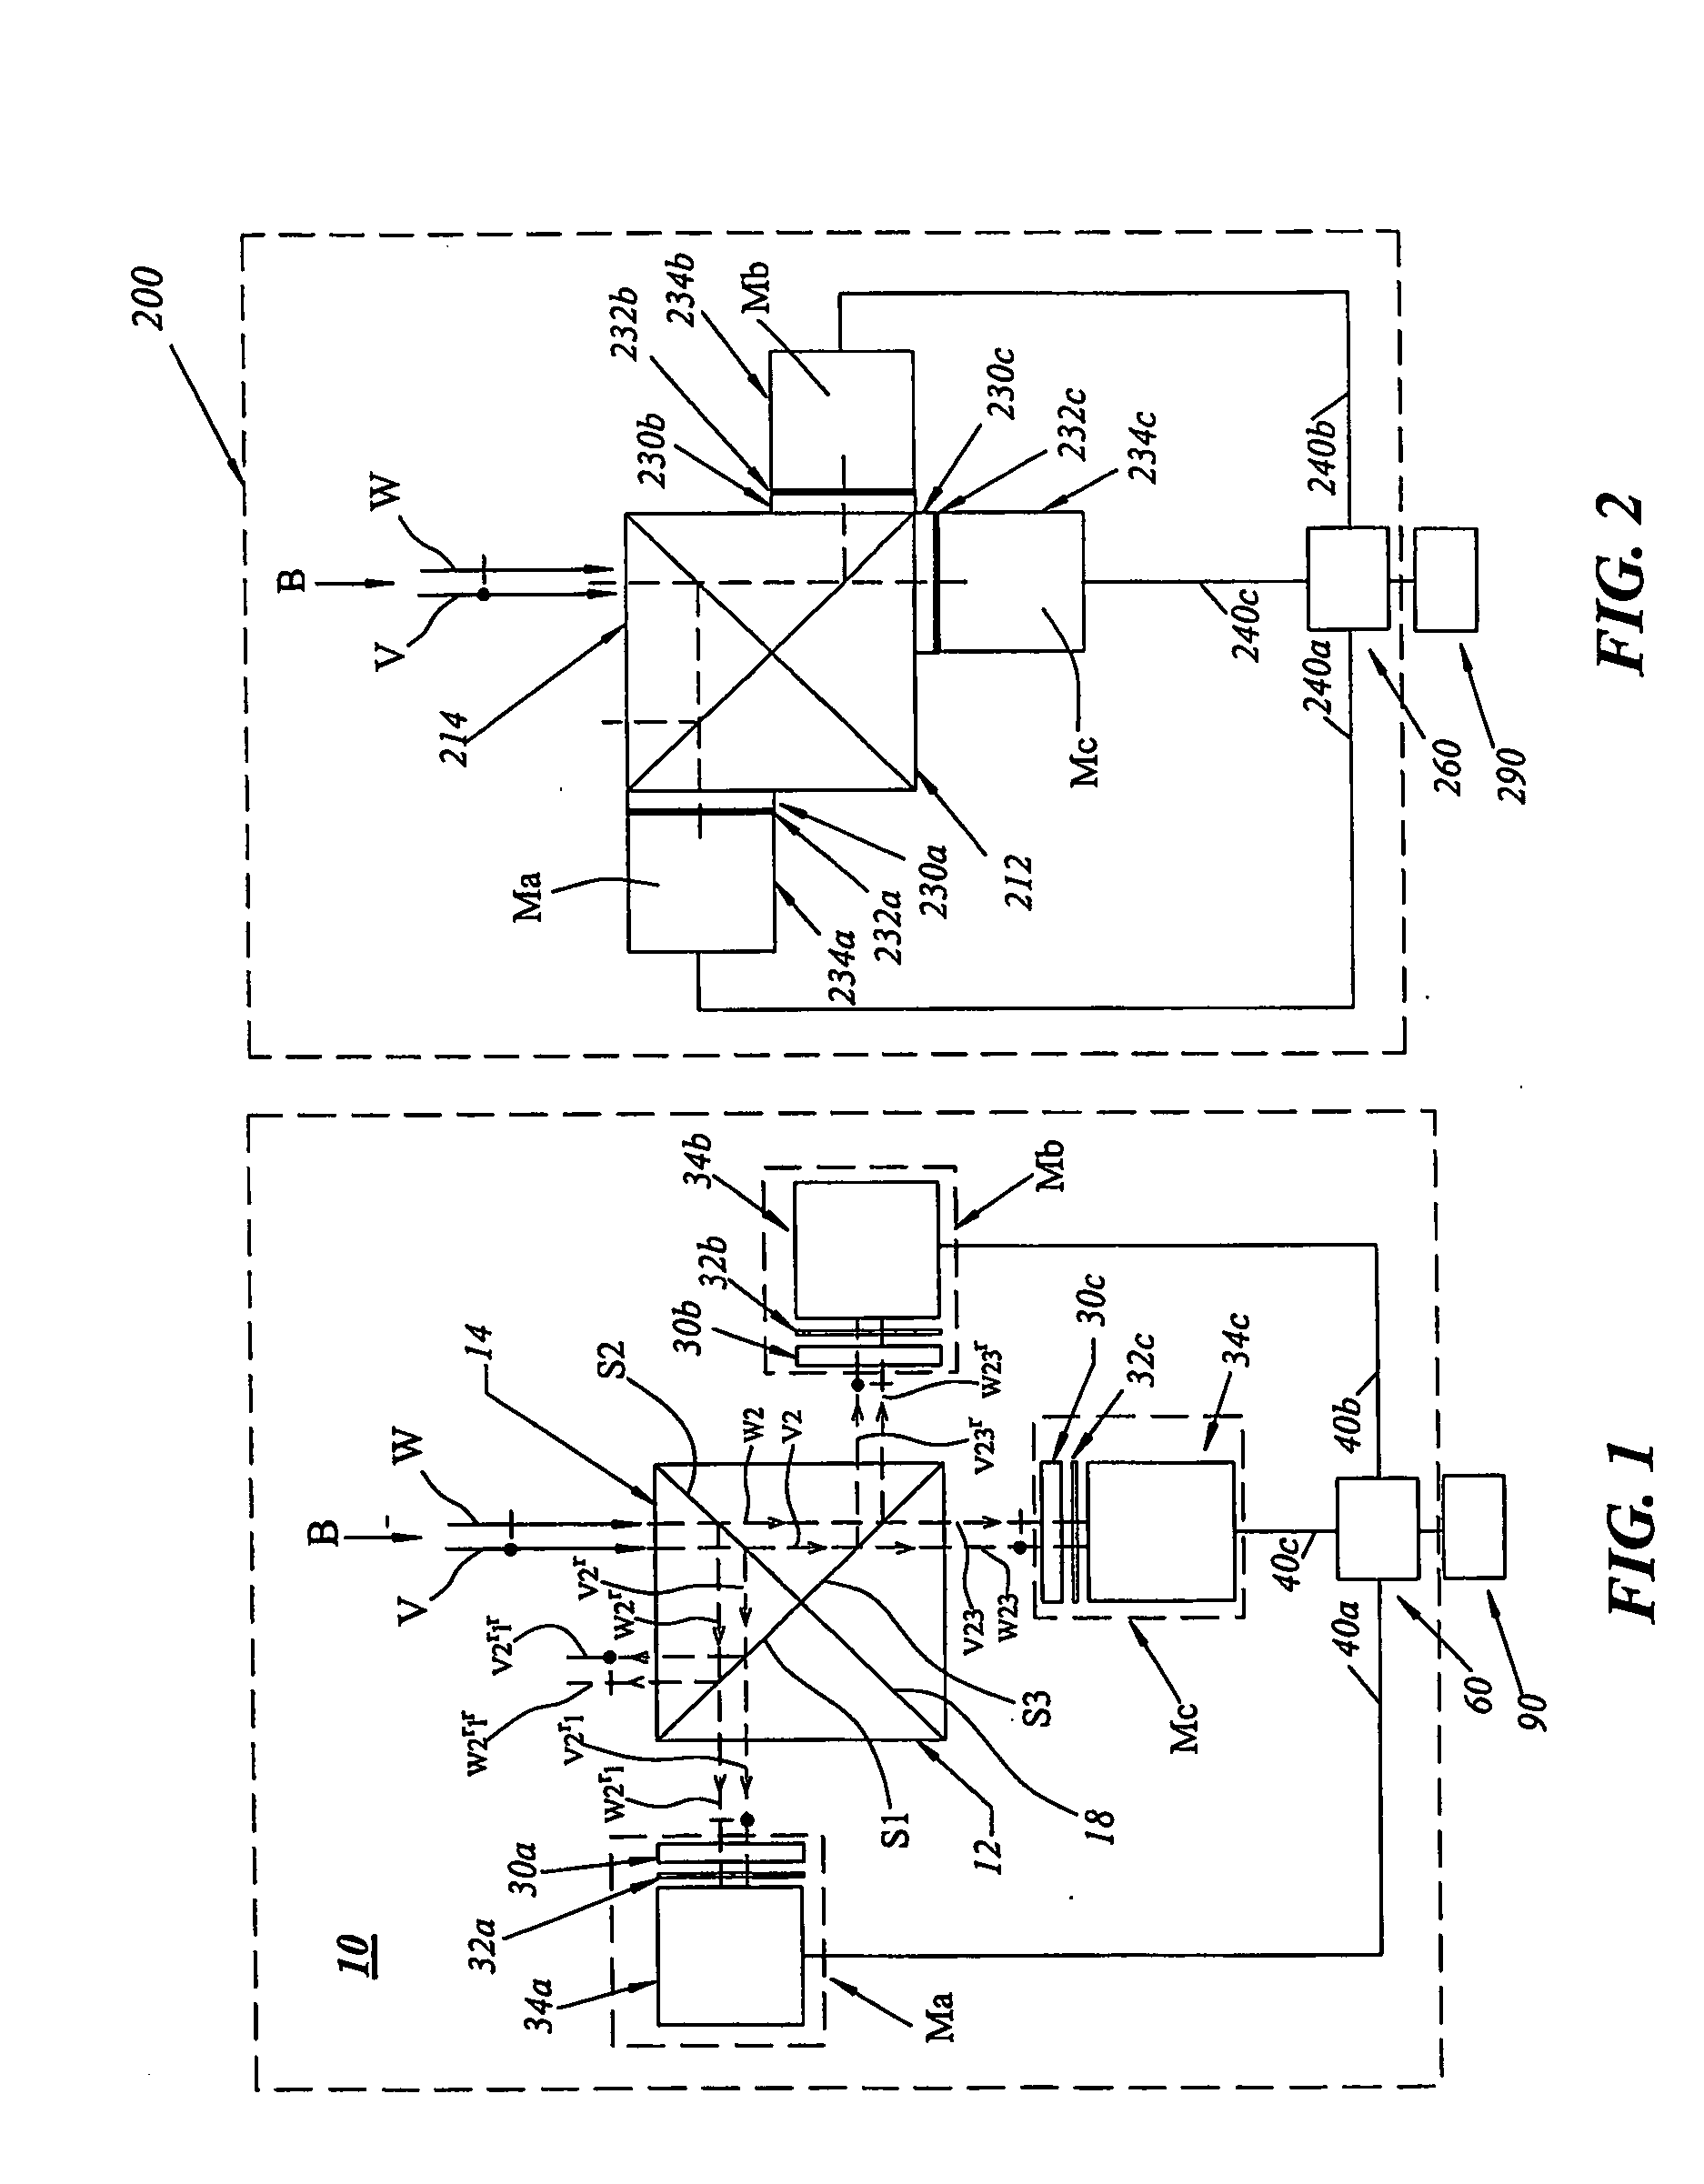 Simultaneous phase shifting module for use in interferometry